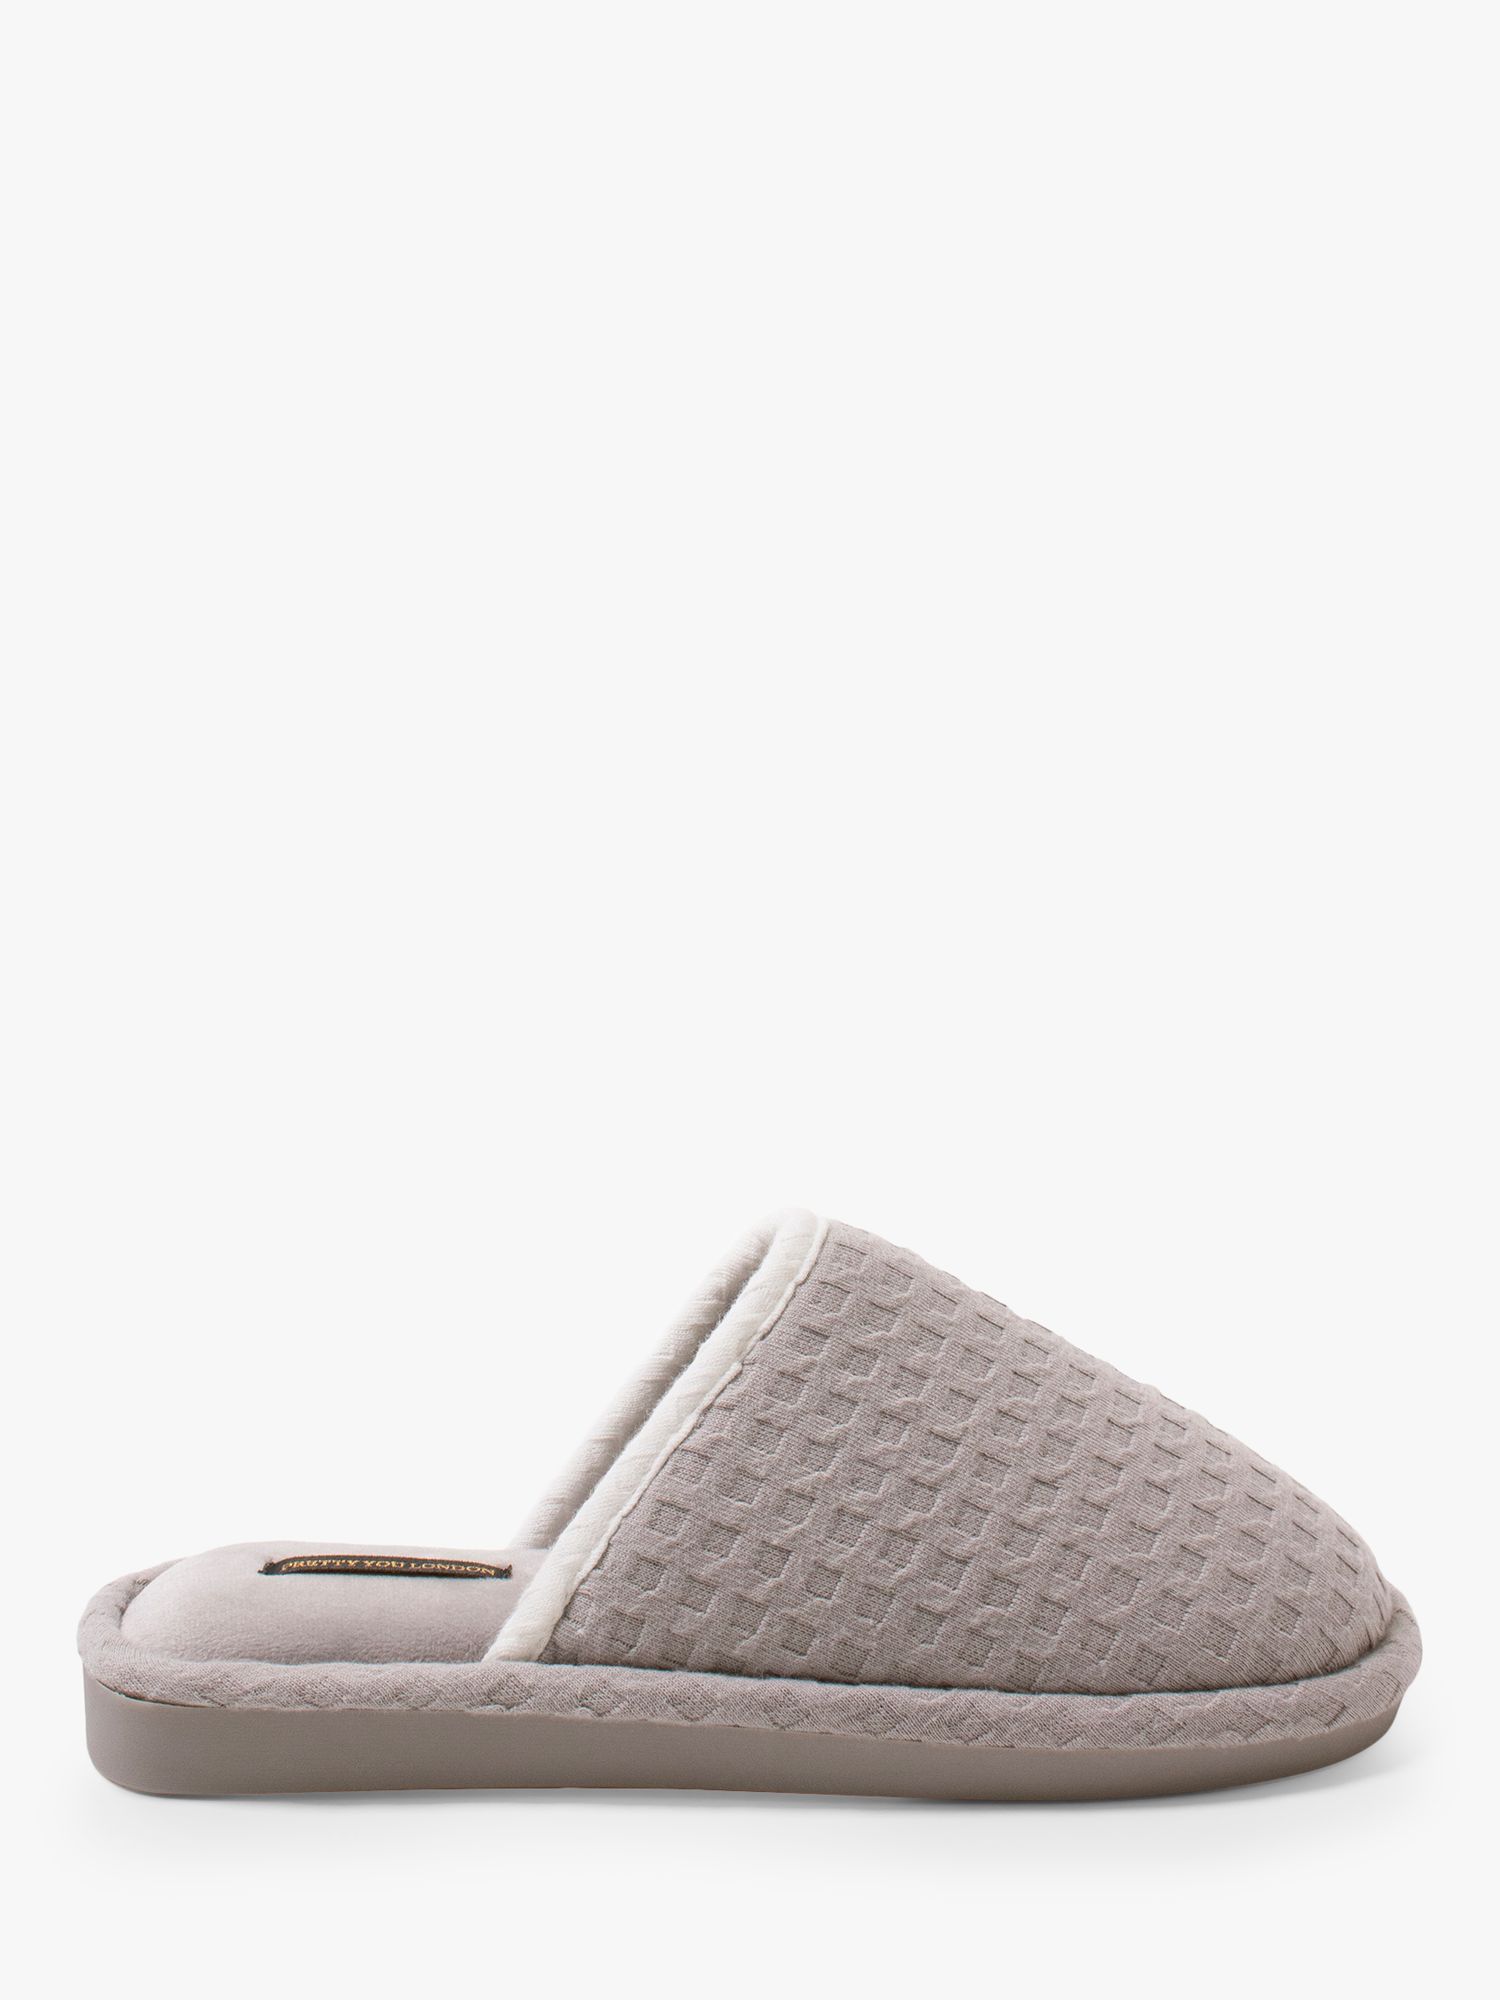 Pretty You London Gia Waffle Mule Slippers, Grey at John Lewis & Partners